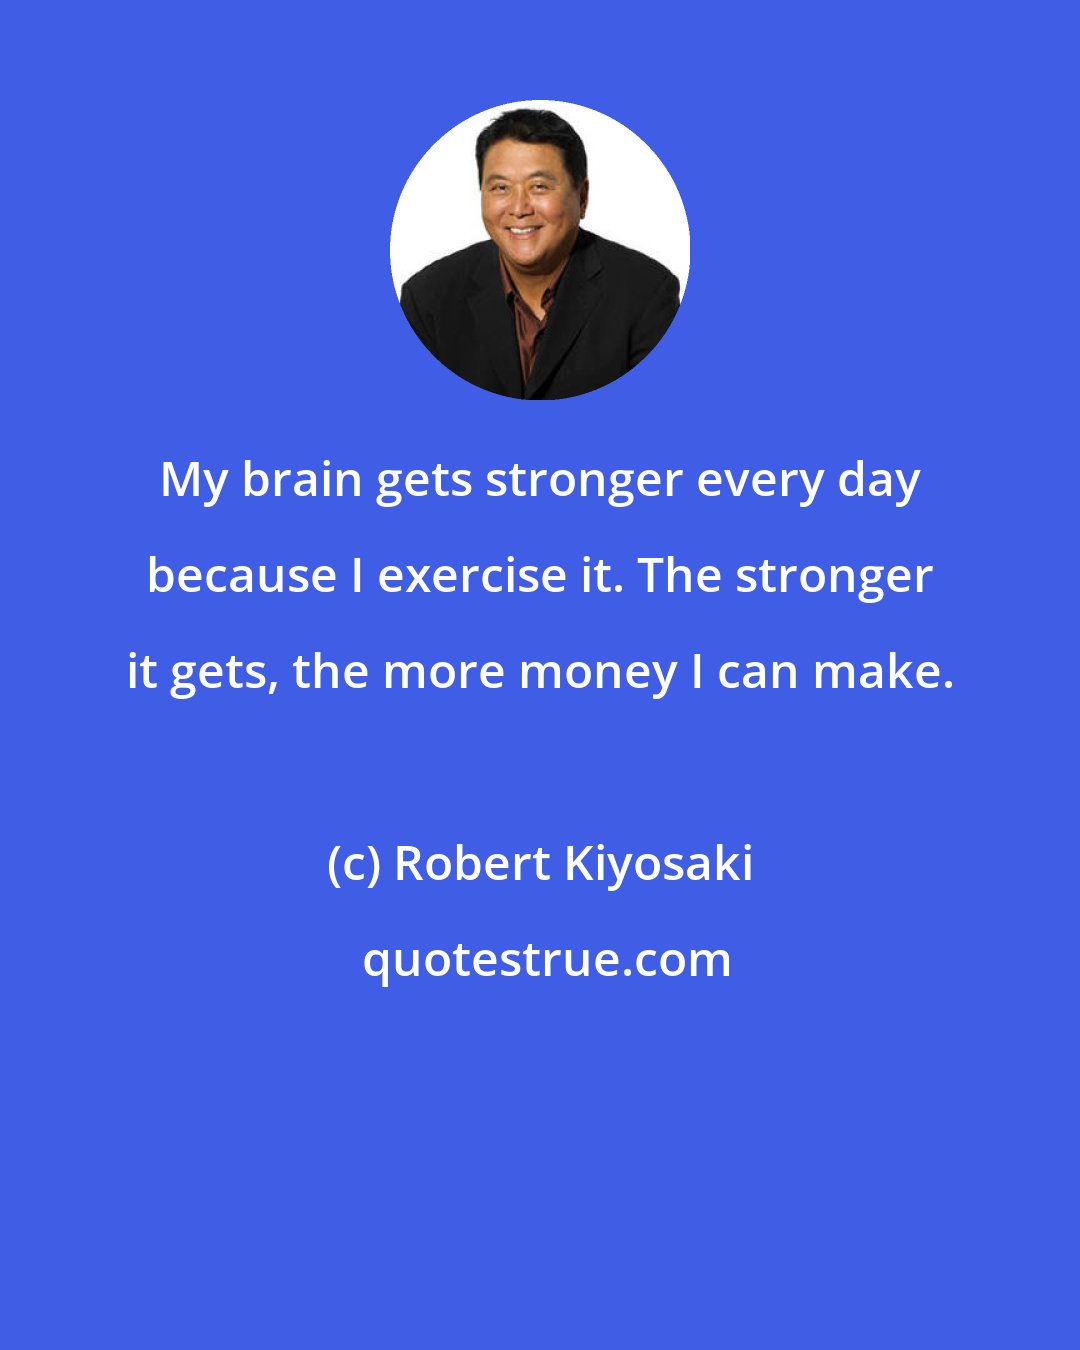 Robert Kiyosaki: My brain gets stronger every day because I exercise it. The stronger it gets, the more money I can make.